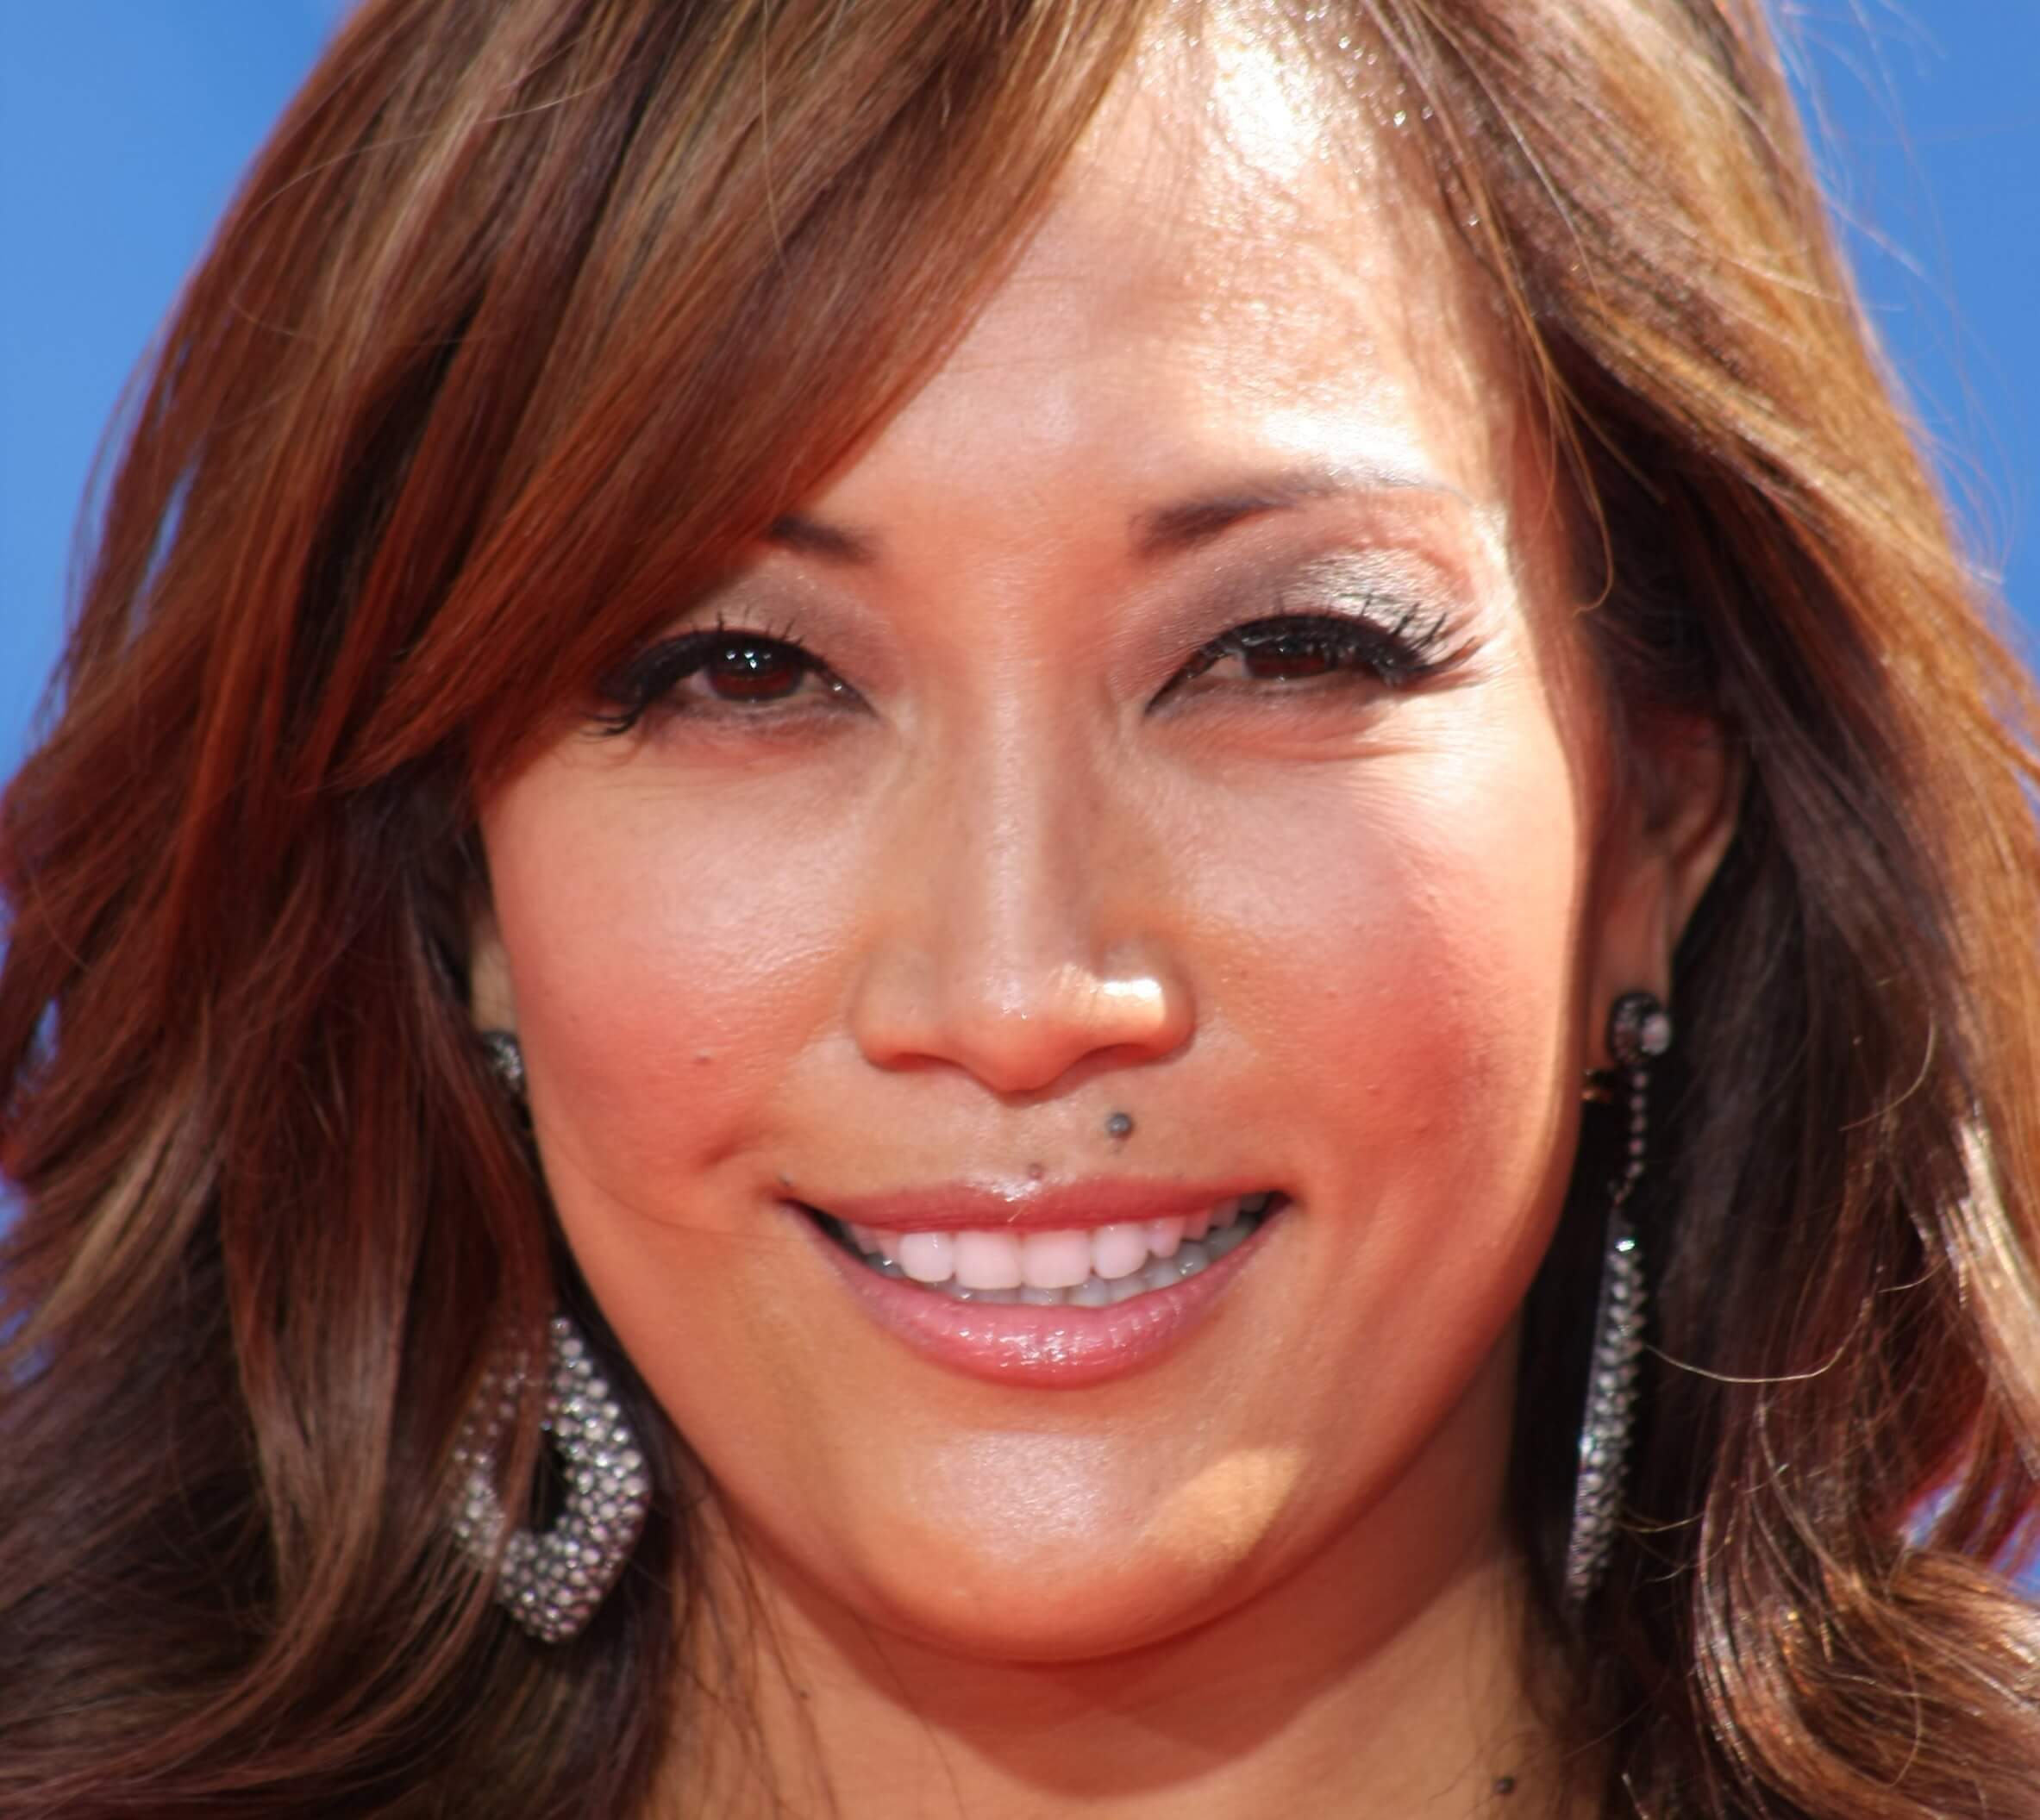 Dancing with the Stars' Judge Carrie Ann Inaba Watches Forks Over Kniv...